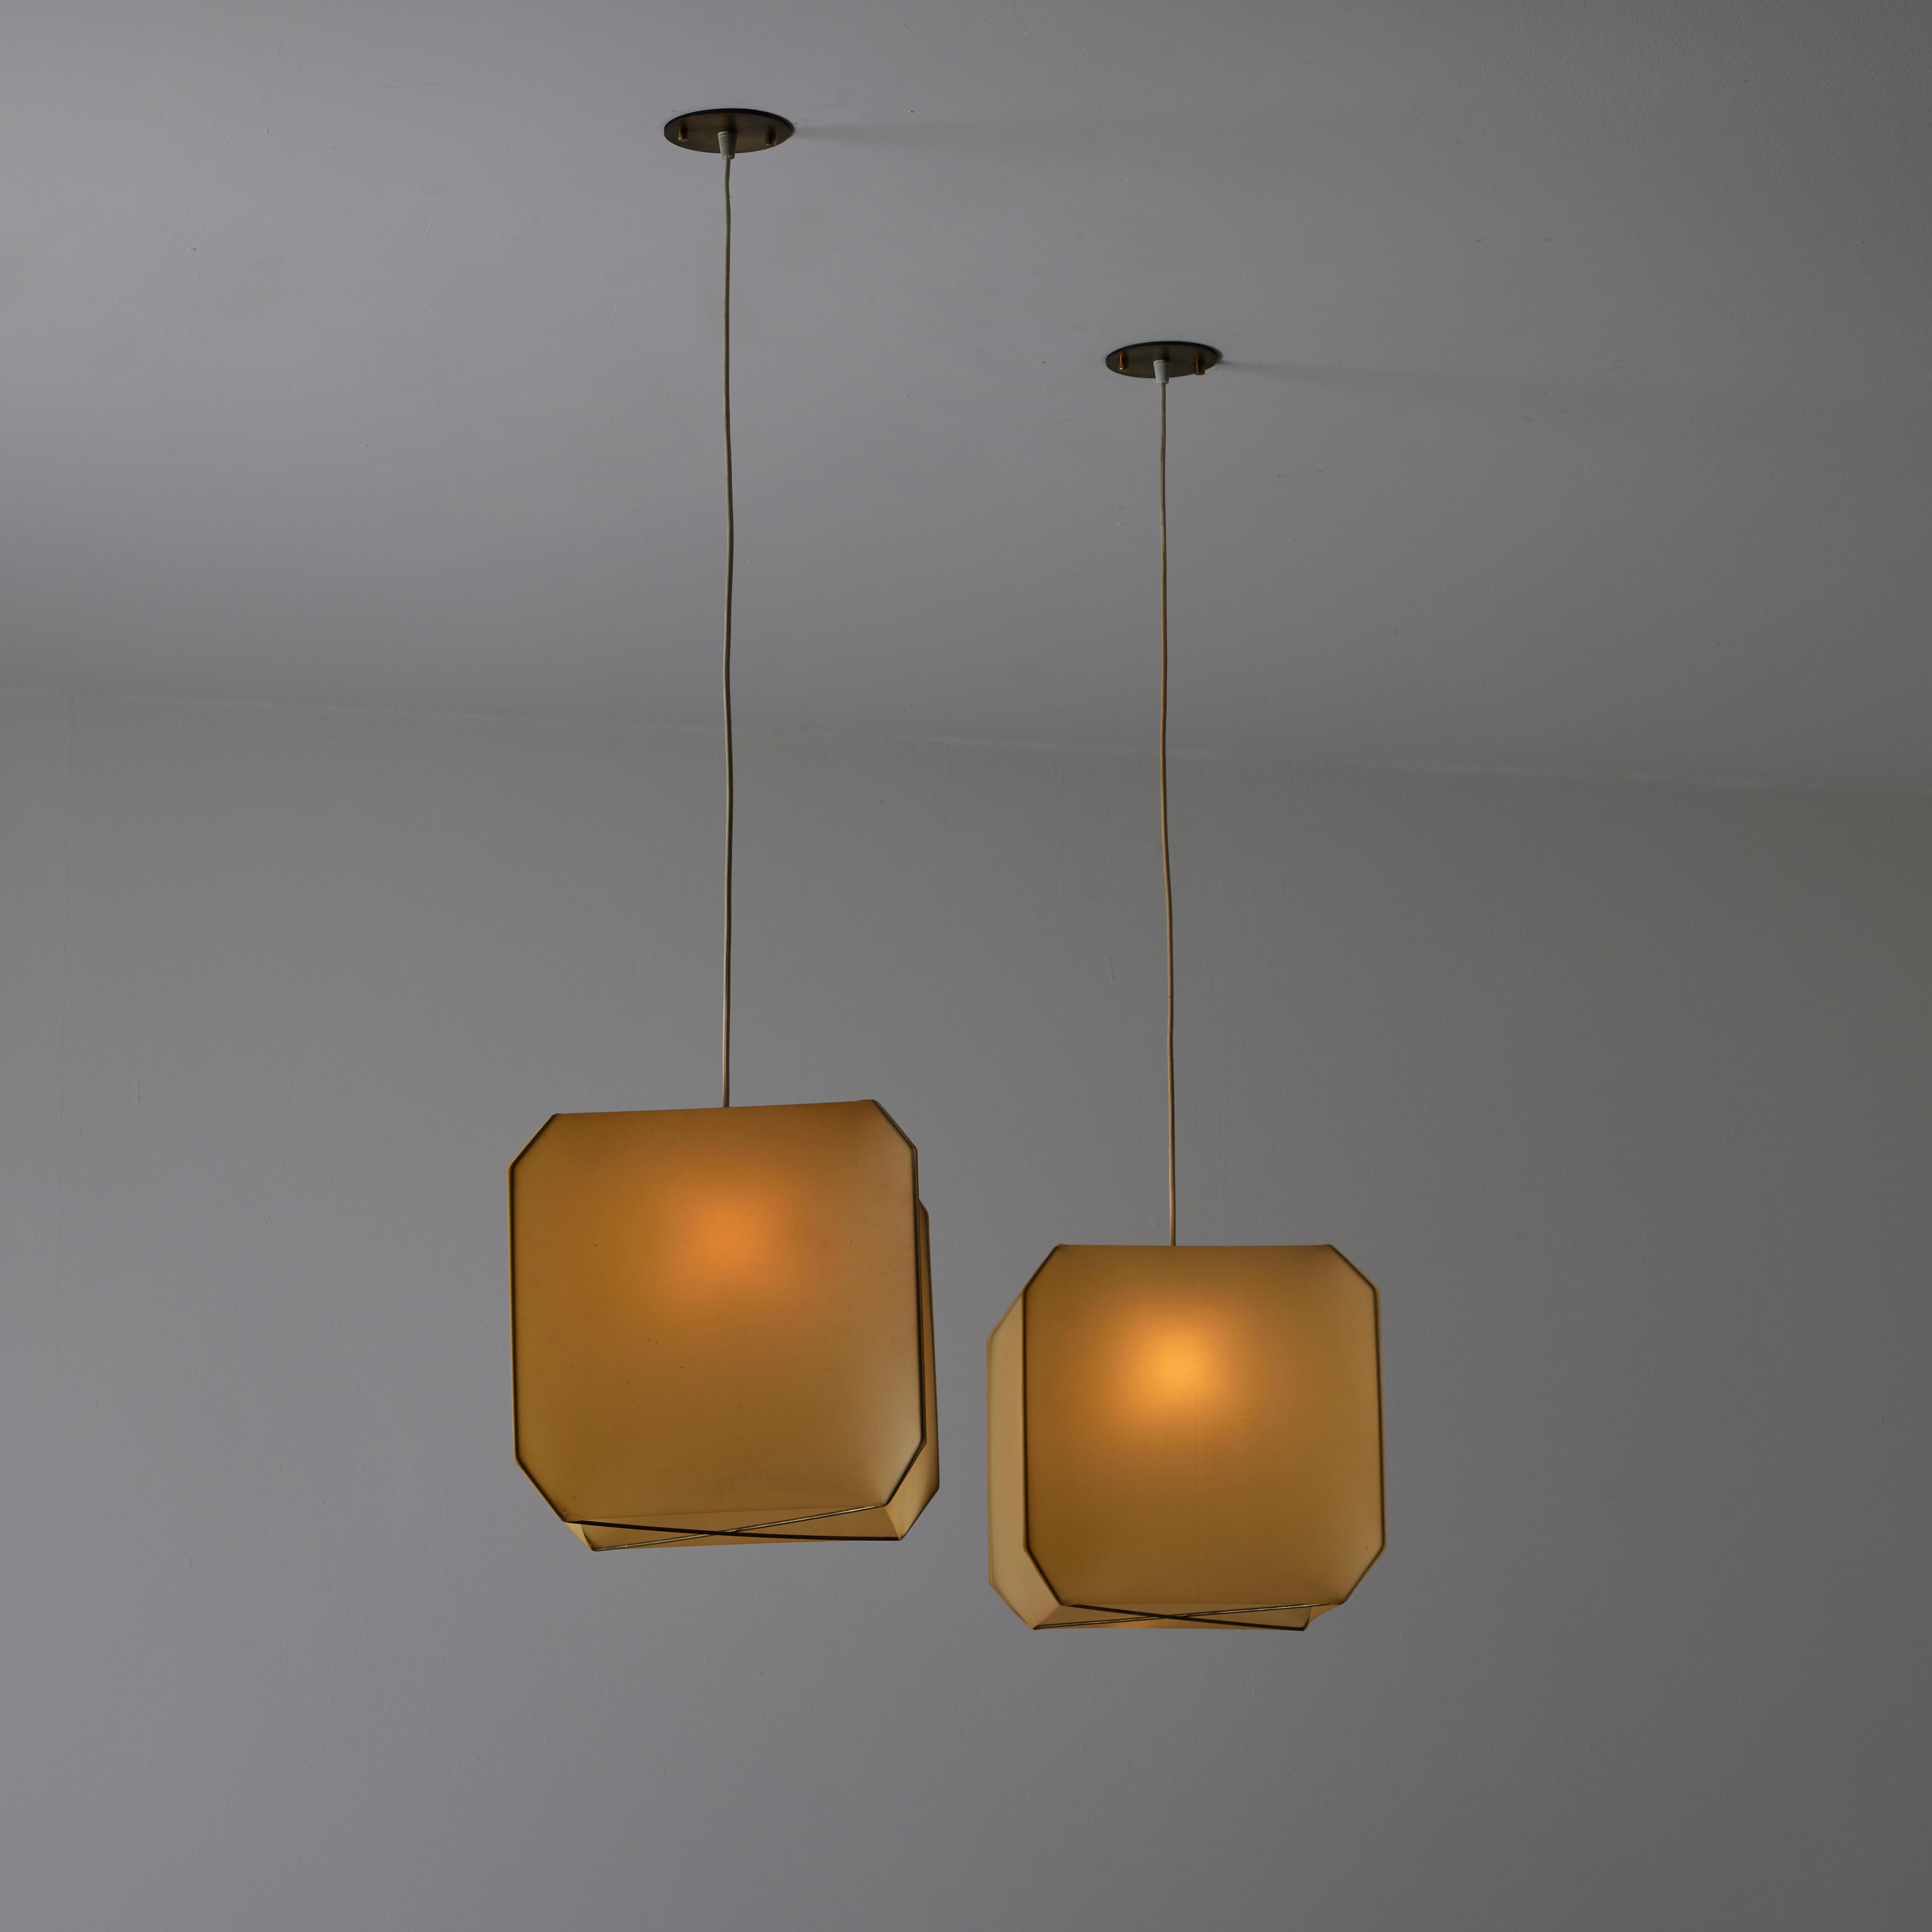 Single Bali suspension light by Bruno Munari for Danese Milano. Designed in Italy, in 1958. Brass, metal, and polymer plastic. Each lamp holds a single E27 socket type, adapted for the US. . We recommend a 40w maximum bulb or LED equivalent. Bulbs